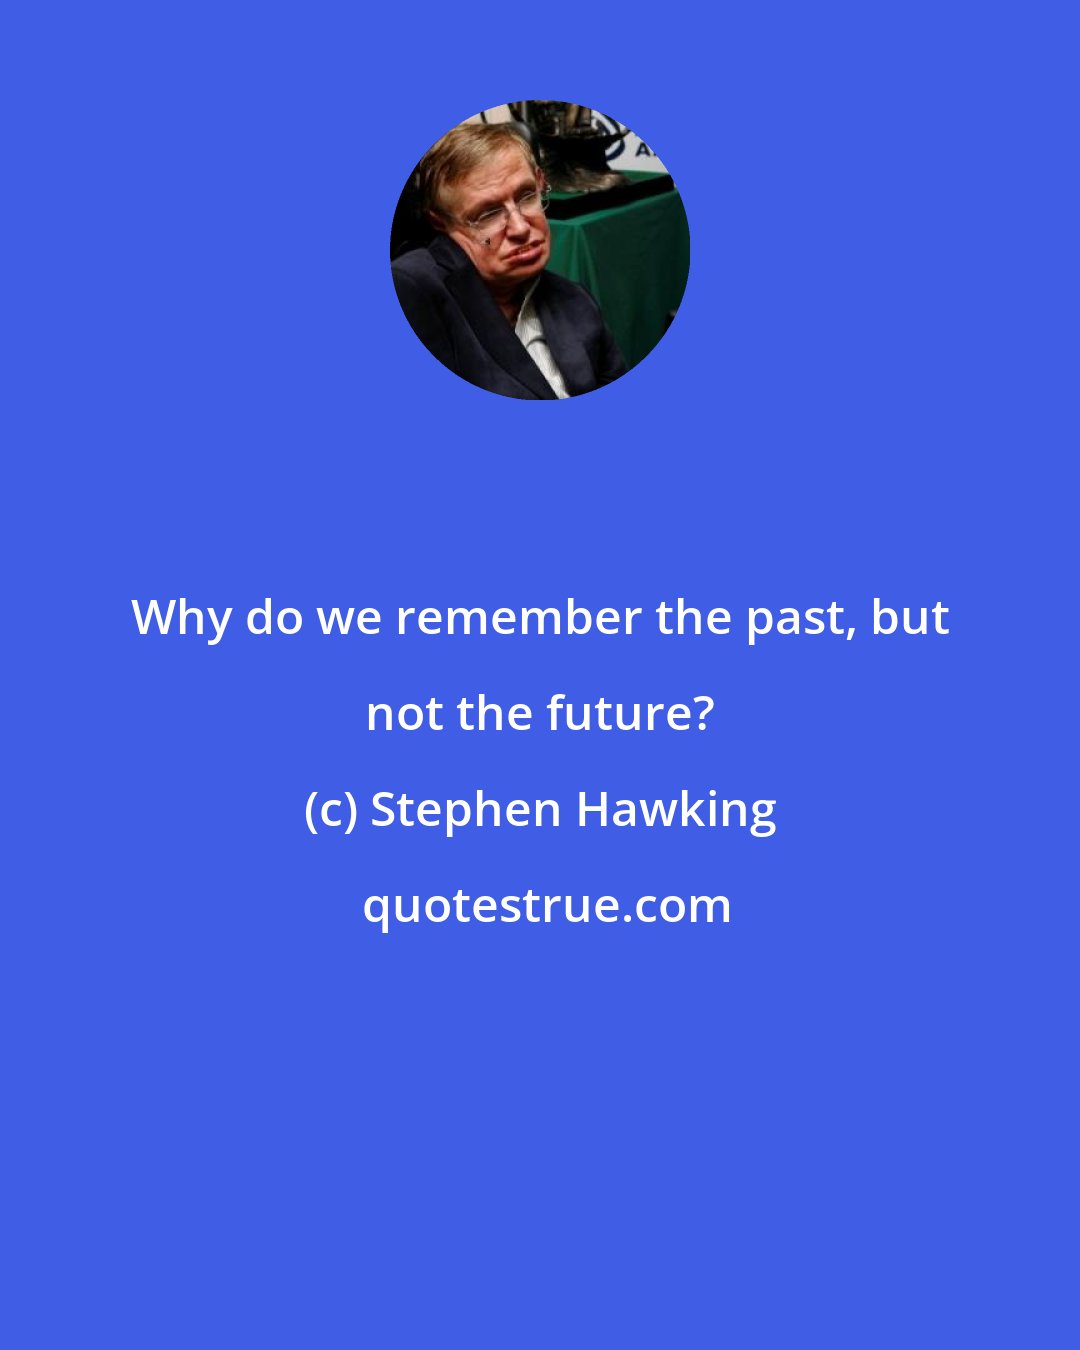 Stephen Hawking: Why do we remember the past, but not the future?